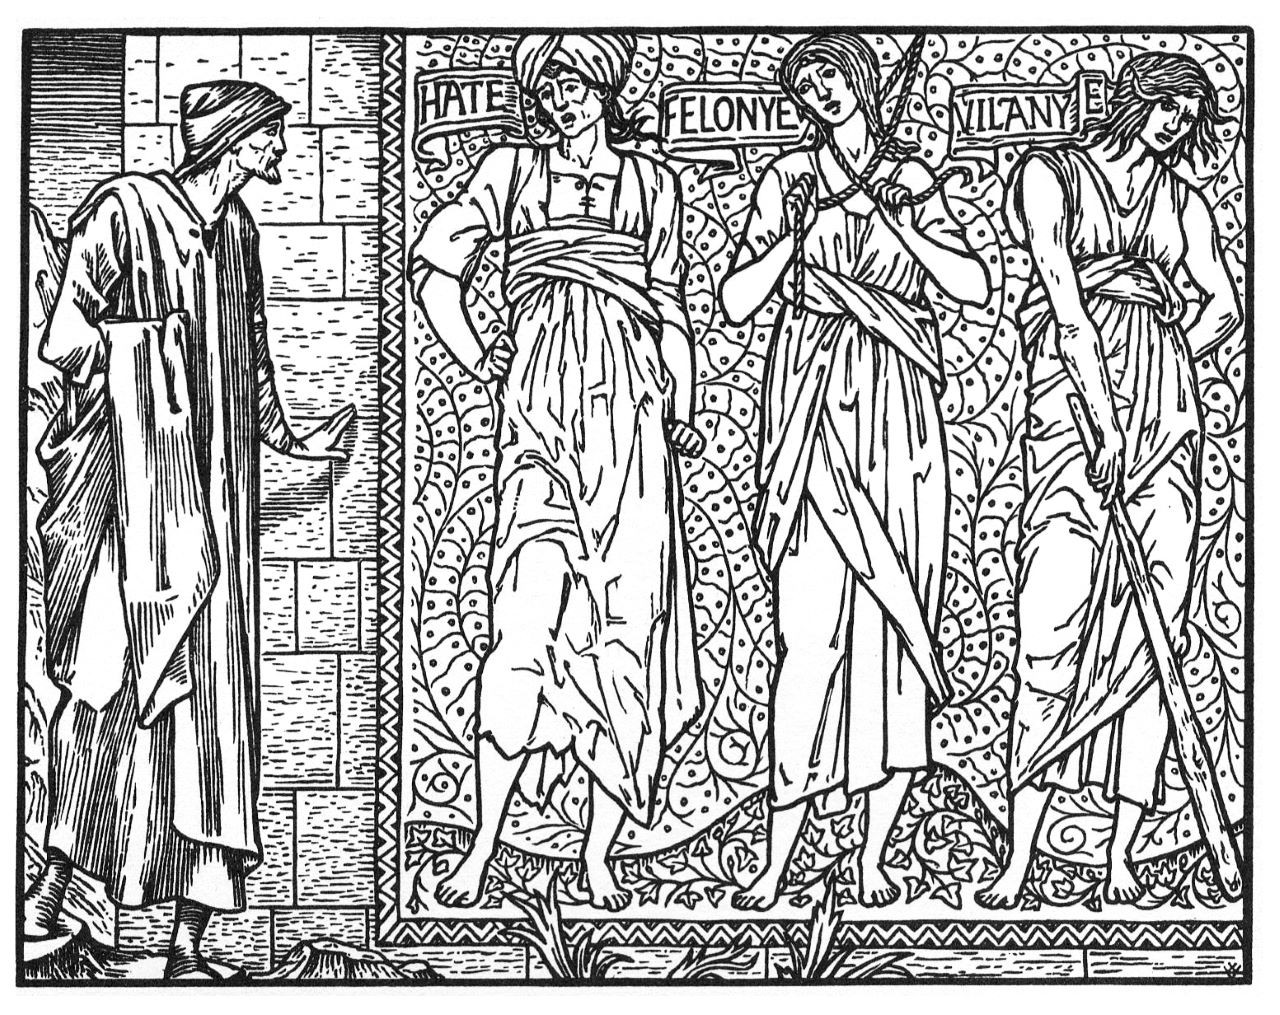 Woodcut by William Morris, from the Kelmscott Chaucer